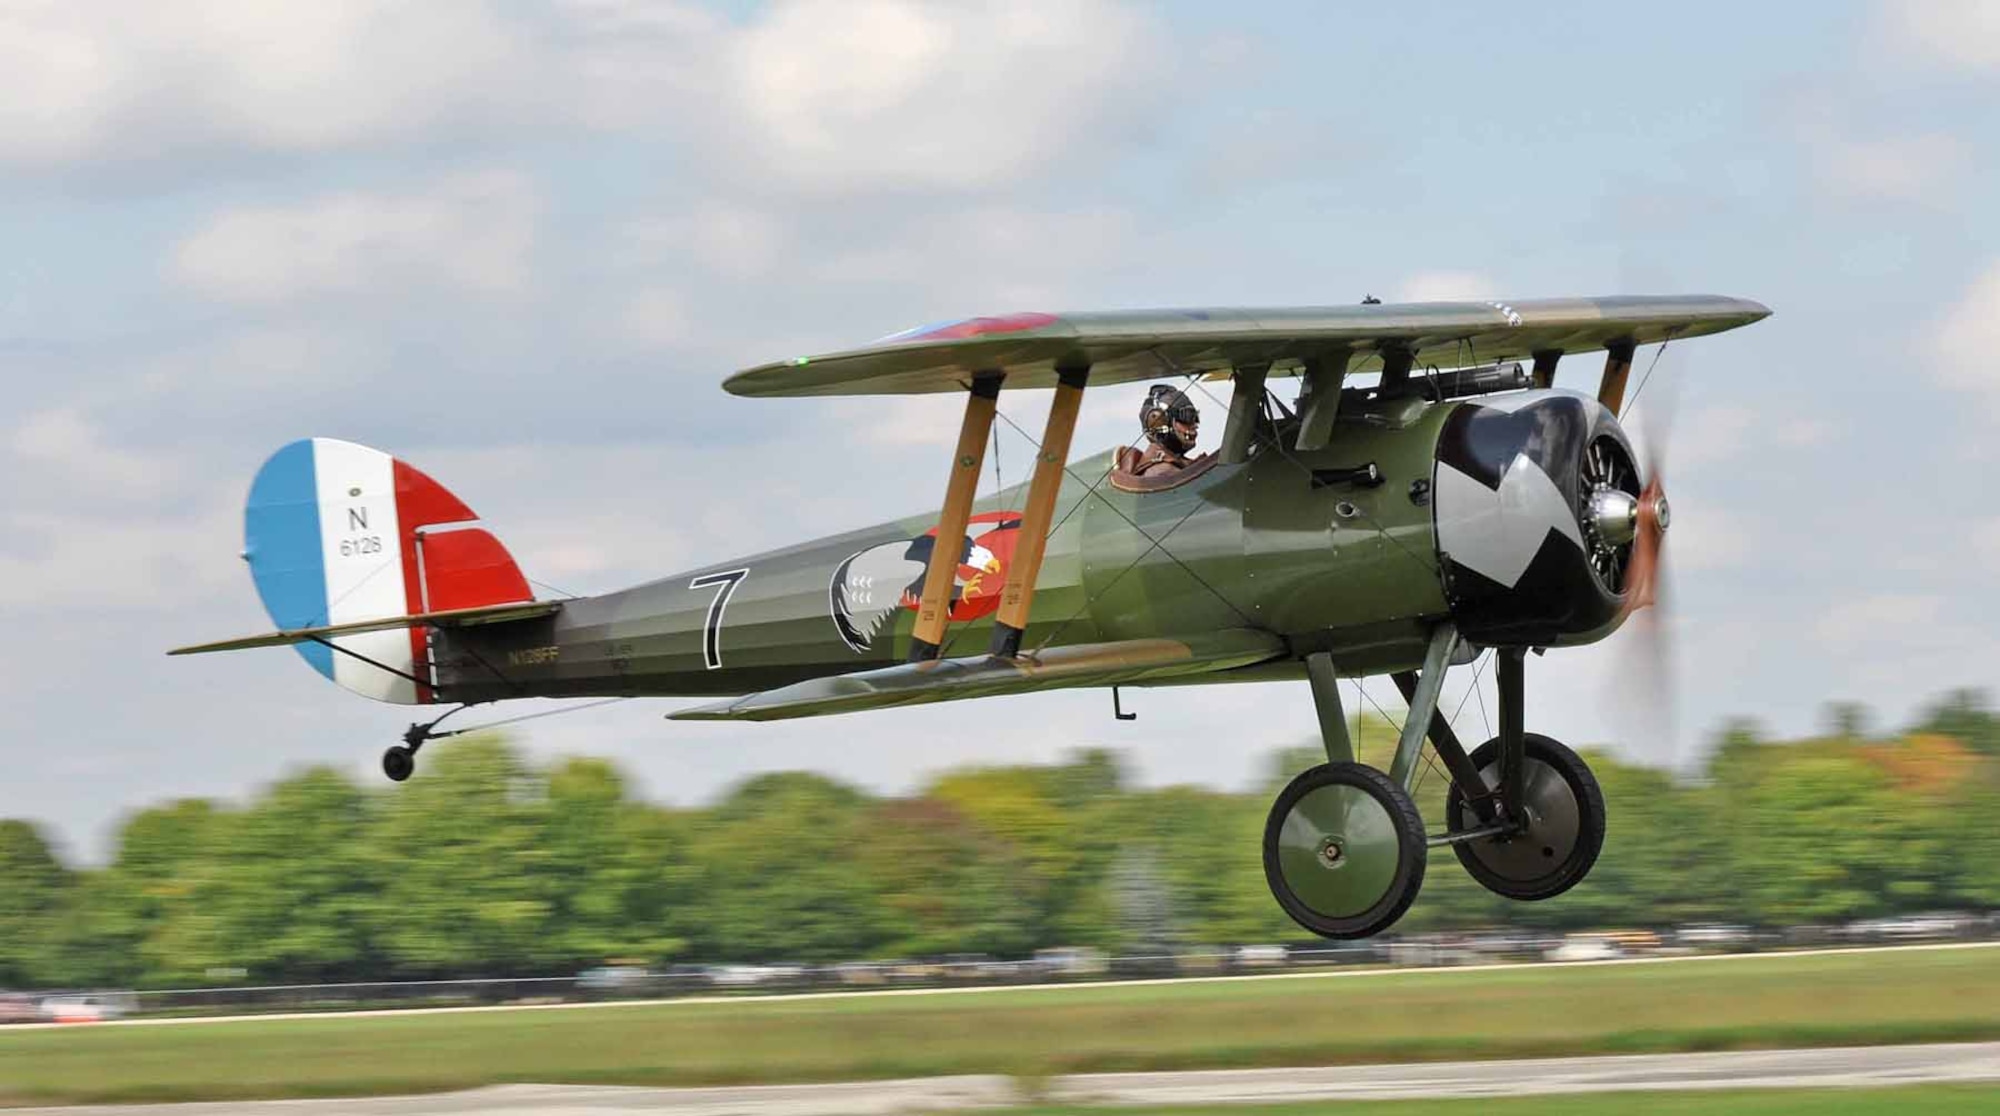 DAYTON, Ohio -- World War I aircraft took to the skies during the World War I Dawn Patrol Rendezvous from Sept. 23-25, 2011, at the National Museum of the U.S. Air Force. (Photo courtesy of Bob Punch)